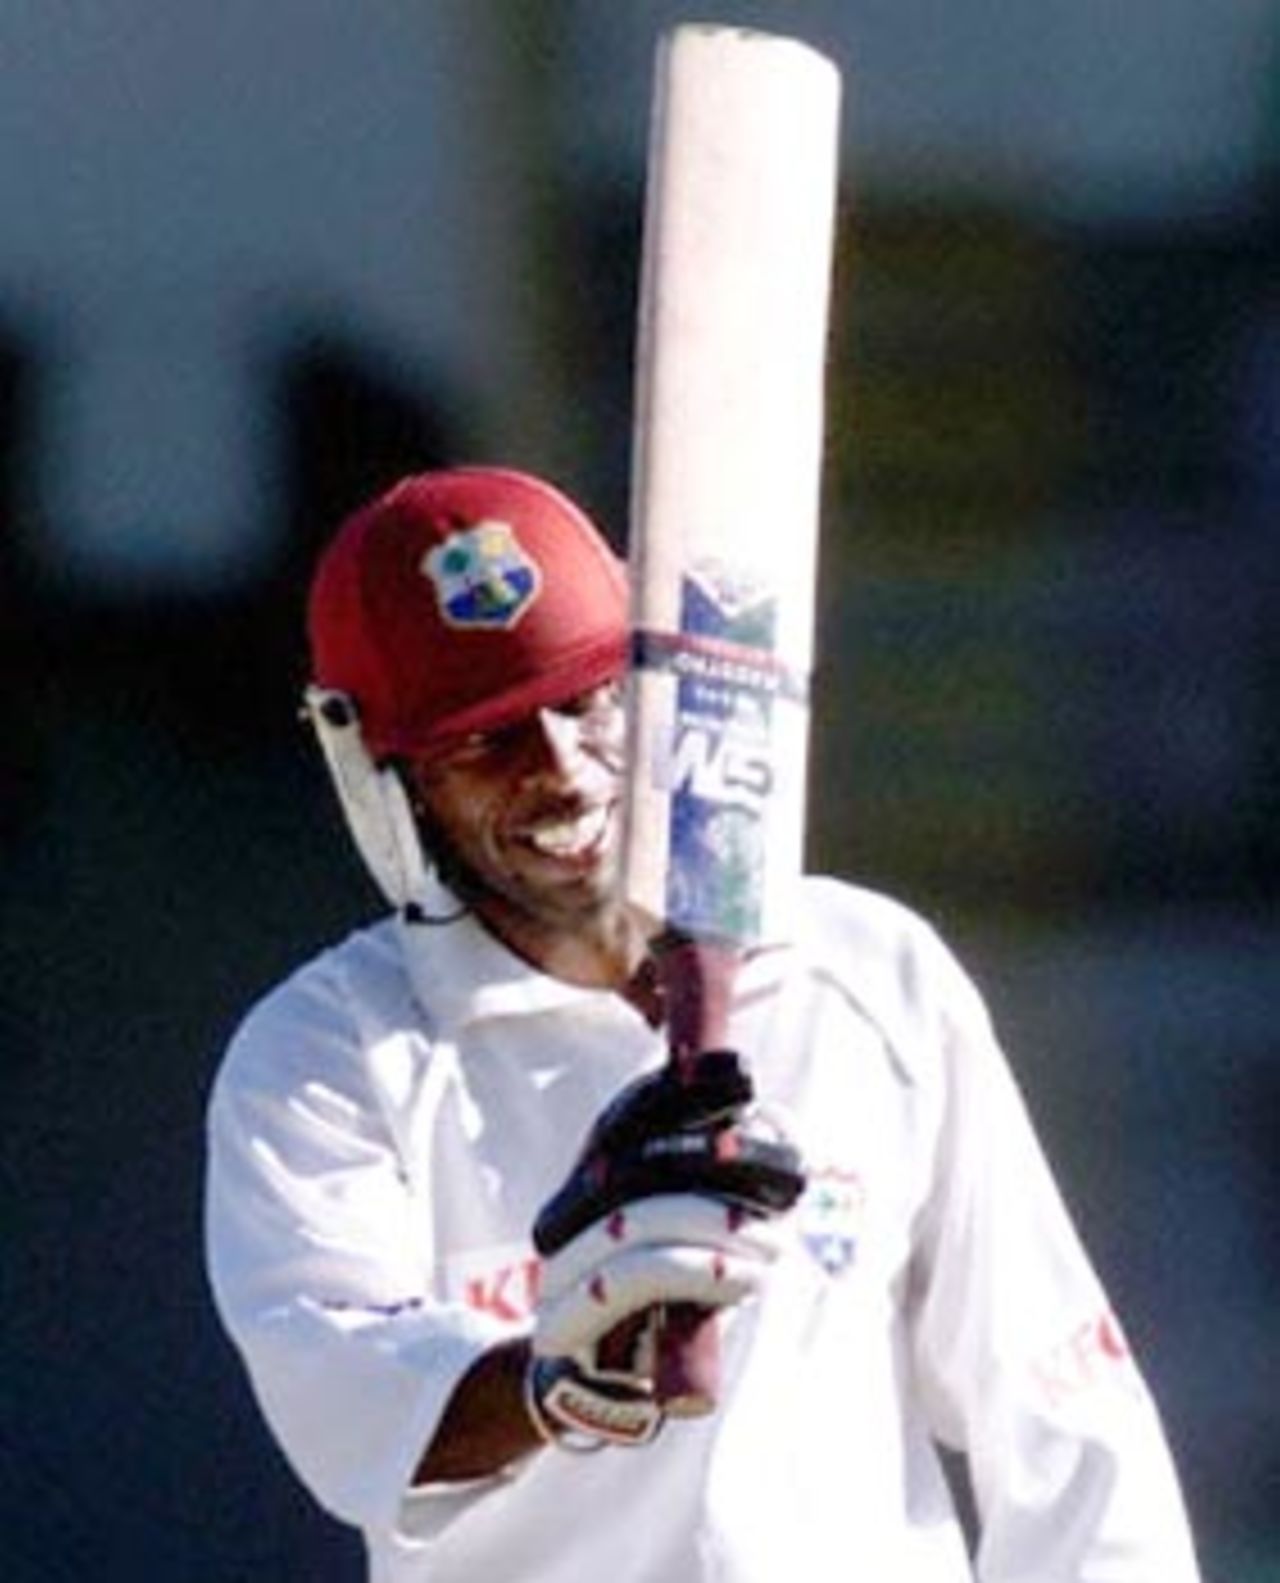 West Indies batsman and vice-captain Sherwin Campbell shows his bat to teammates after scoring a century during a four-day match against the Western Warriors at the WACA ground in Perth 11 November 2000. Campbell is currently not out on 114, with the West Indies on 4-230.